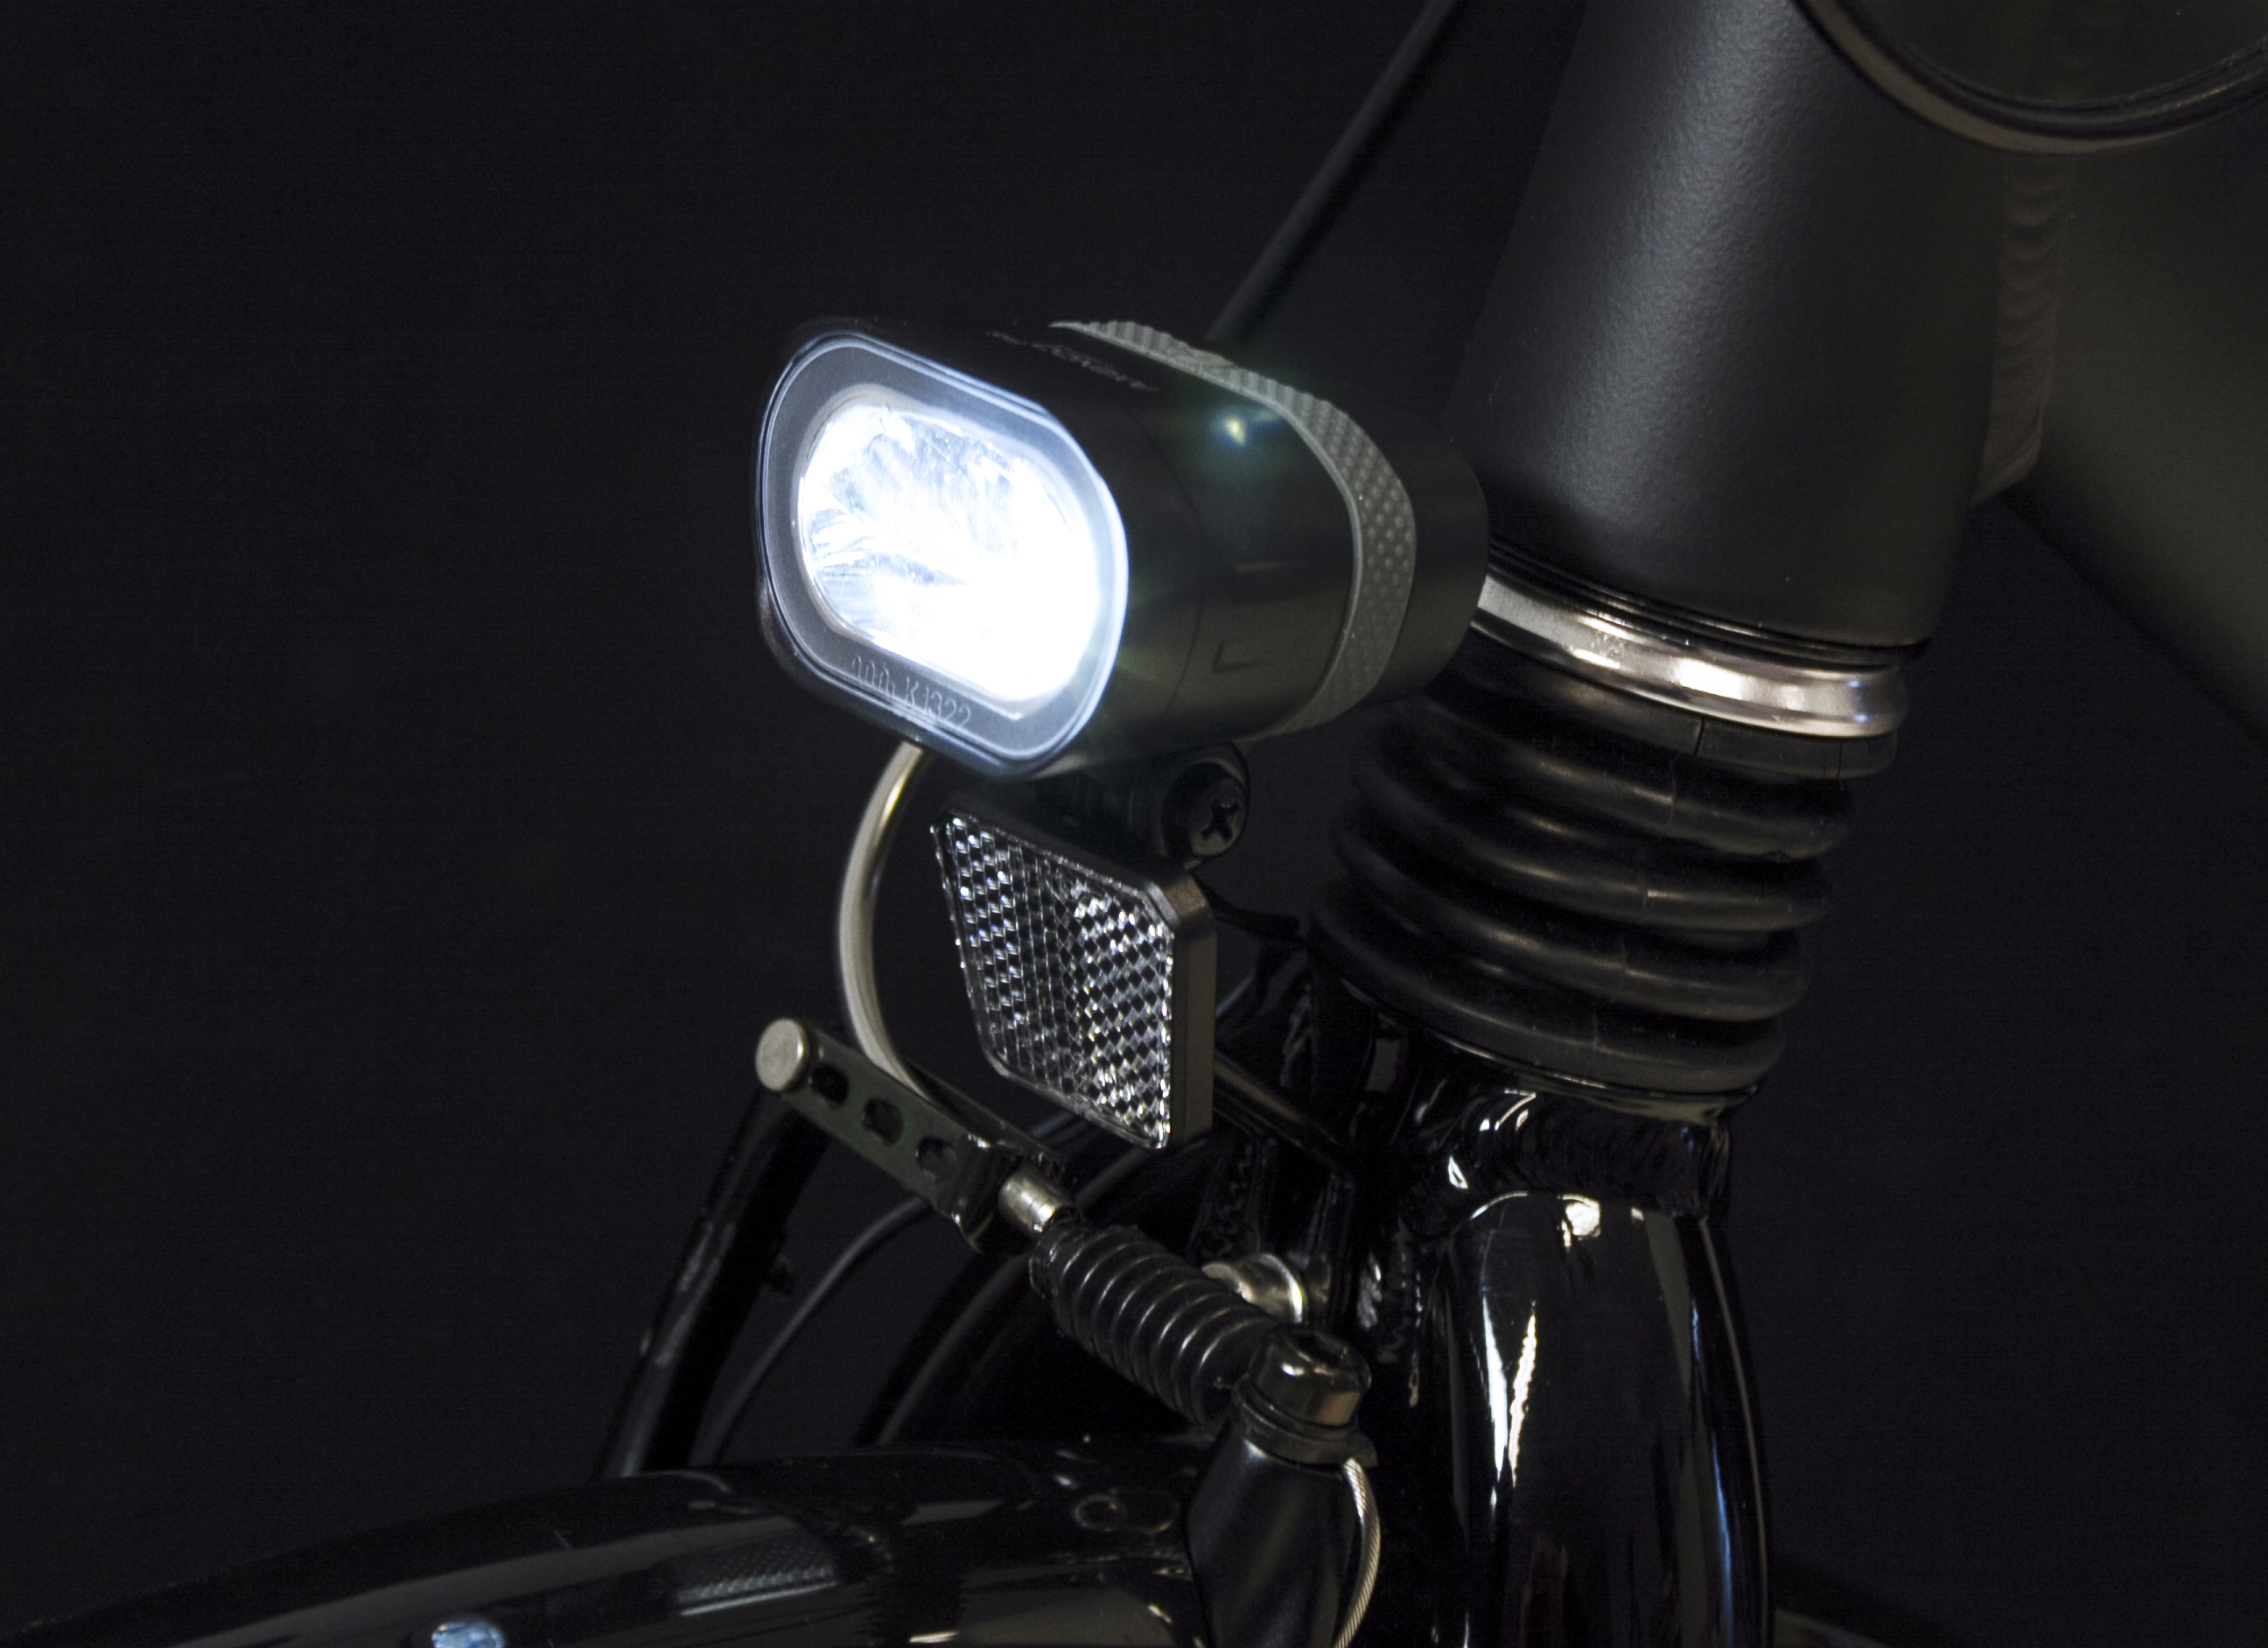 Axendo 40 headlamp on front fork with Br 195 bracket